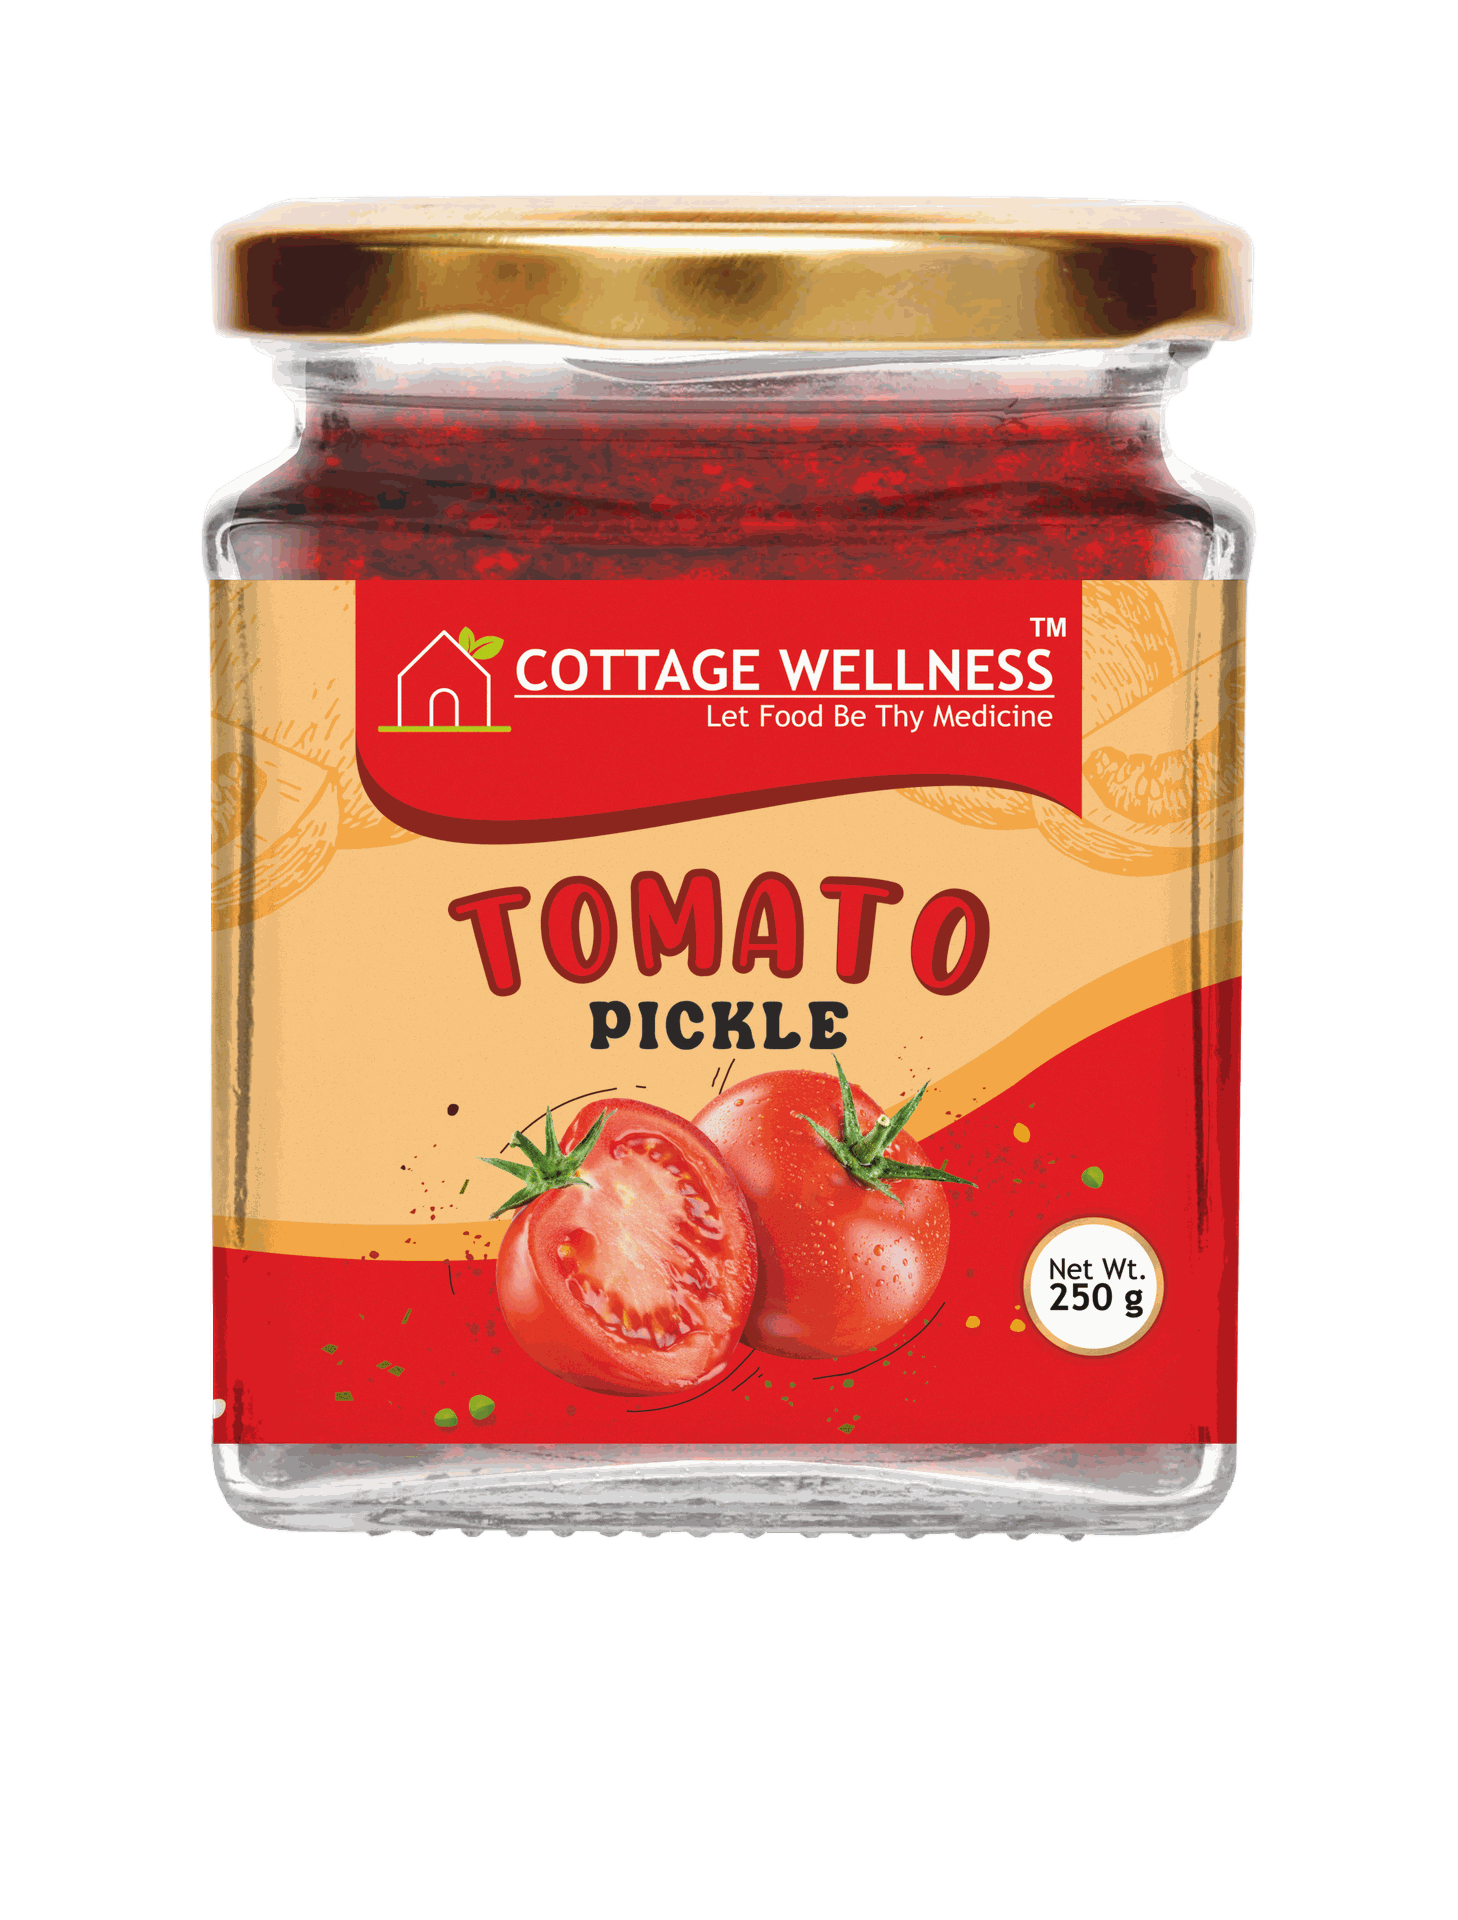 Cottage Wellness Home Made Tomato Pickle 250 gm - hfnl!fe